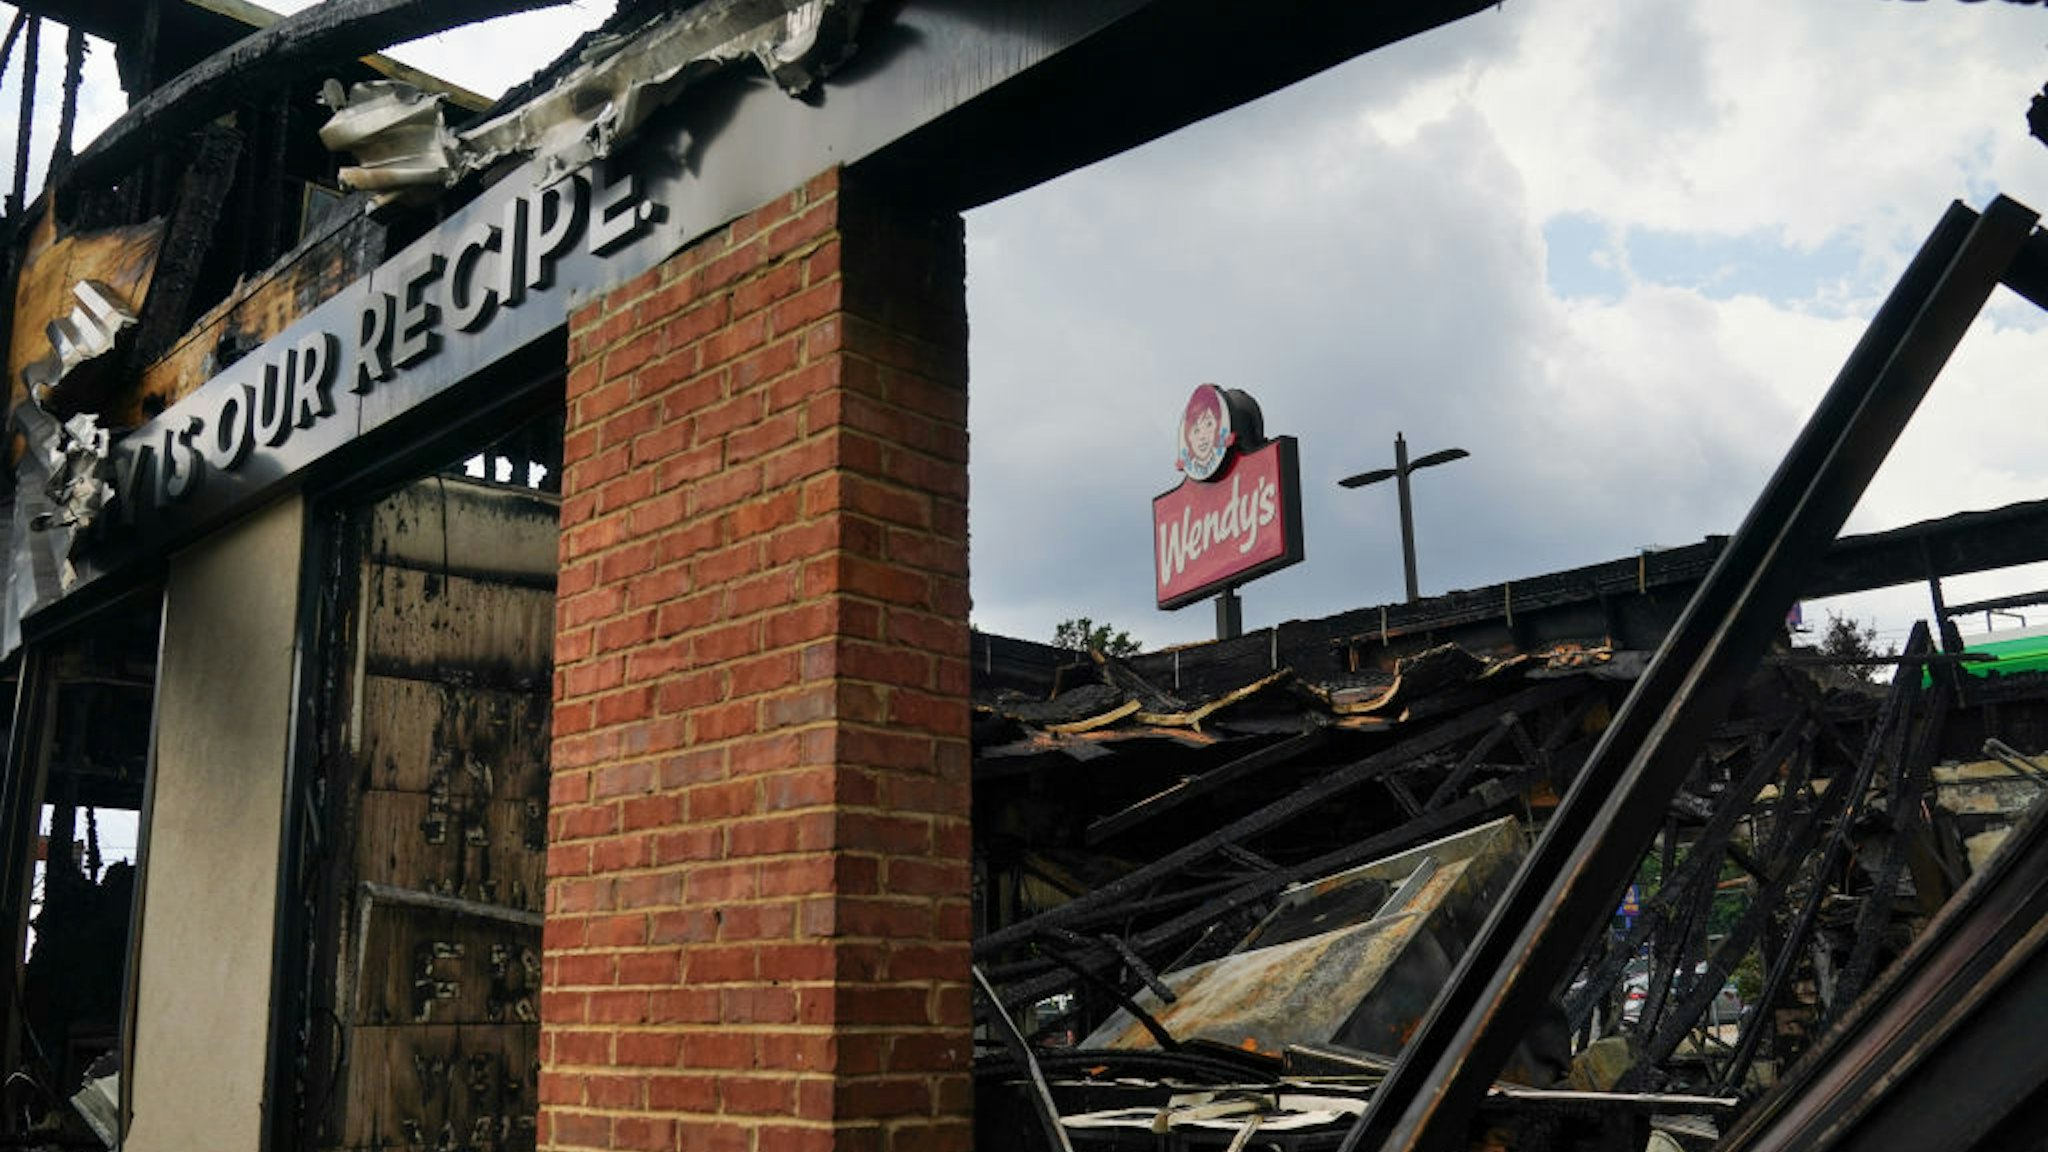 A burned Wendys restaurant is seen on the second day following the police shooting death of Rayshard Brooks in the restaurant parking lot June 14, 2020, in Atlanta, Georgia. - The fatal shooting of a black man by a white police officer, this time in Atlanta, Georgia, poured more fuel June 14, 2020 on a raging US debate over racism after another round of street protests and the resignation of the city's police chief. A Wendy's restaurant where 27-year-old Rayshard Brooks was killed was set on fire June 13, 2020 and hundreds of people marched to protest the killing. (Photo by Elijah Nouvelage / AFP) (Photo by ELIJAH NOUVELAGE/AFP via Getty Images)